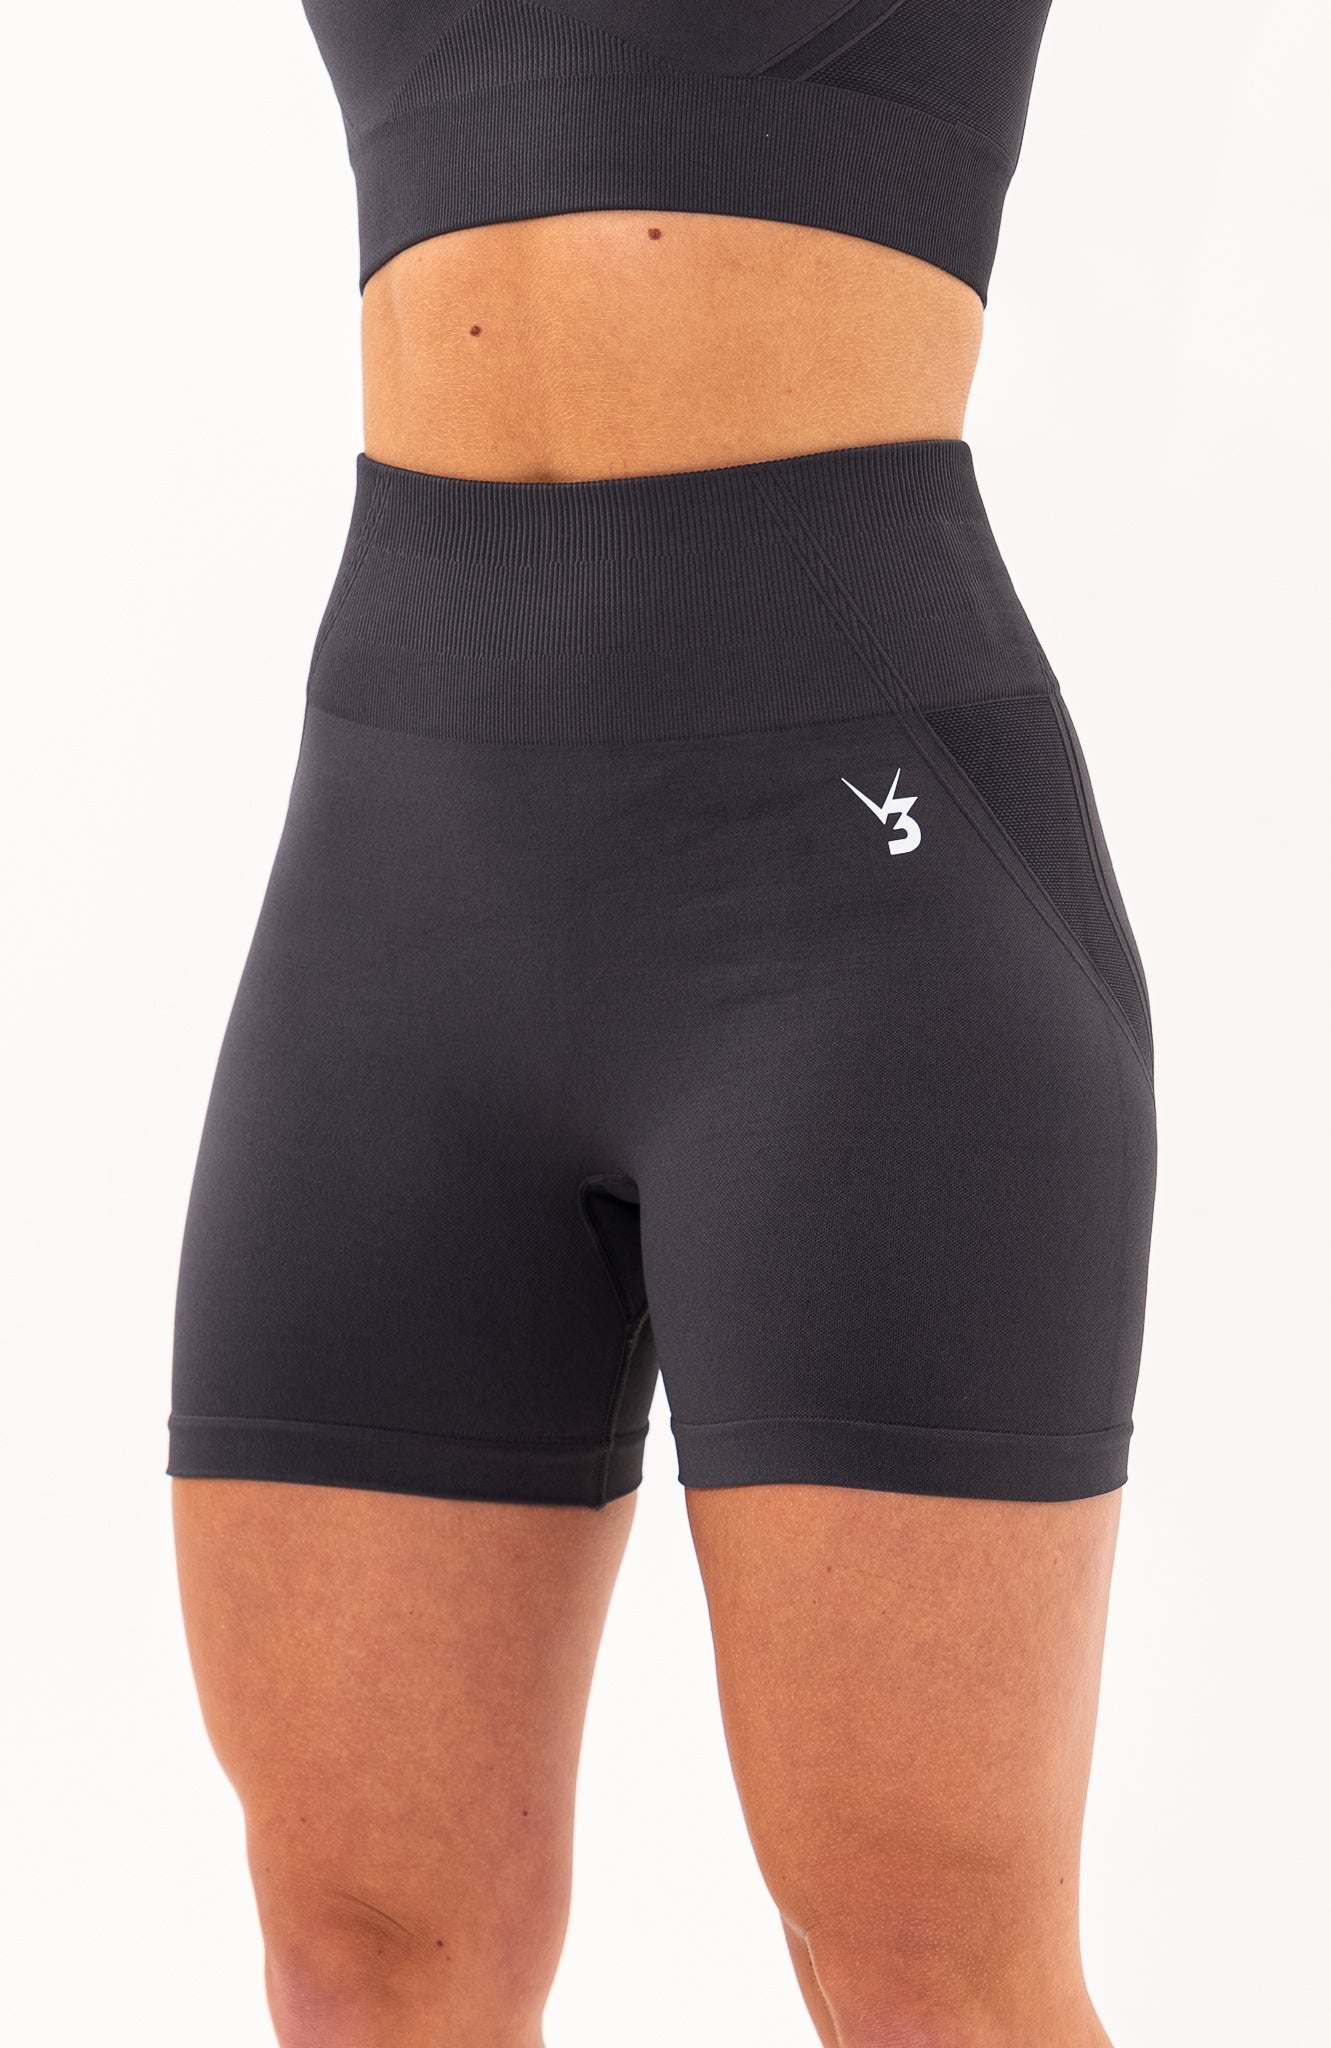 V3 Apparel Women's Tempo seamless scrunch bum shaping high waisted cycle shorts in charcoal grey – Squat proof 5 inch leg gym shorts for workouts training, Running, yoga, bodybuilding and bikini fitness.